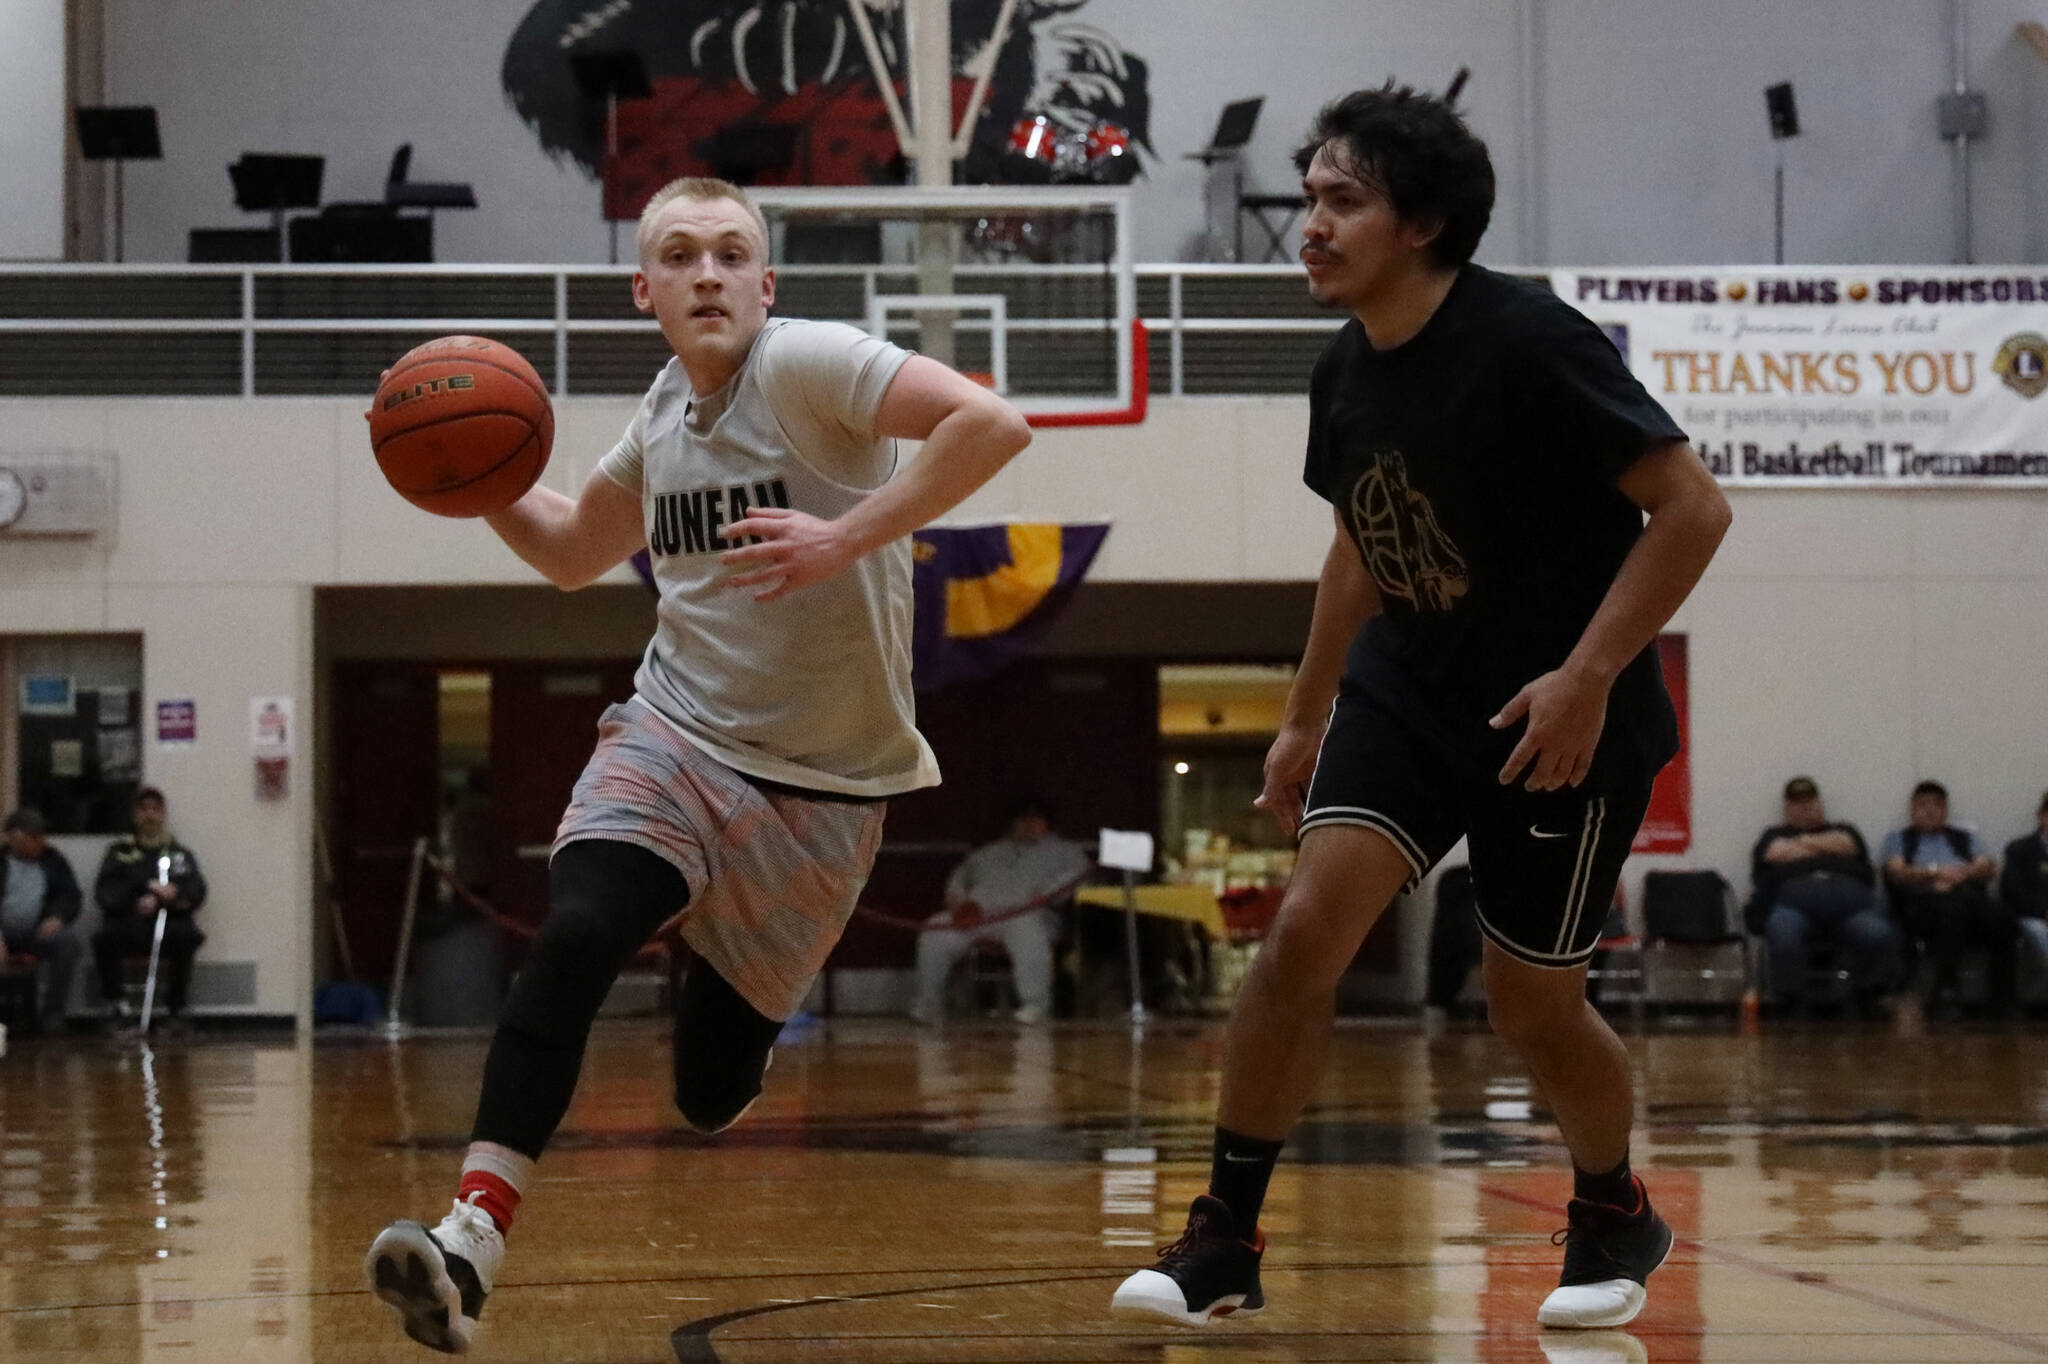 Juneau’s Chase Saviers goes in for a layup Monday afternoon in a B Bracket game against Metlakatla during the Juneau Lions Club 74th Annual Gold Medal Basketball Tournament at the Juneau-Douglas High School: Yadaa.at Kalé gymnasium. (Clarise Larson / Juneau Empire)